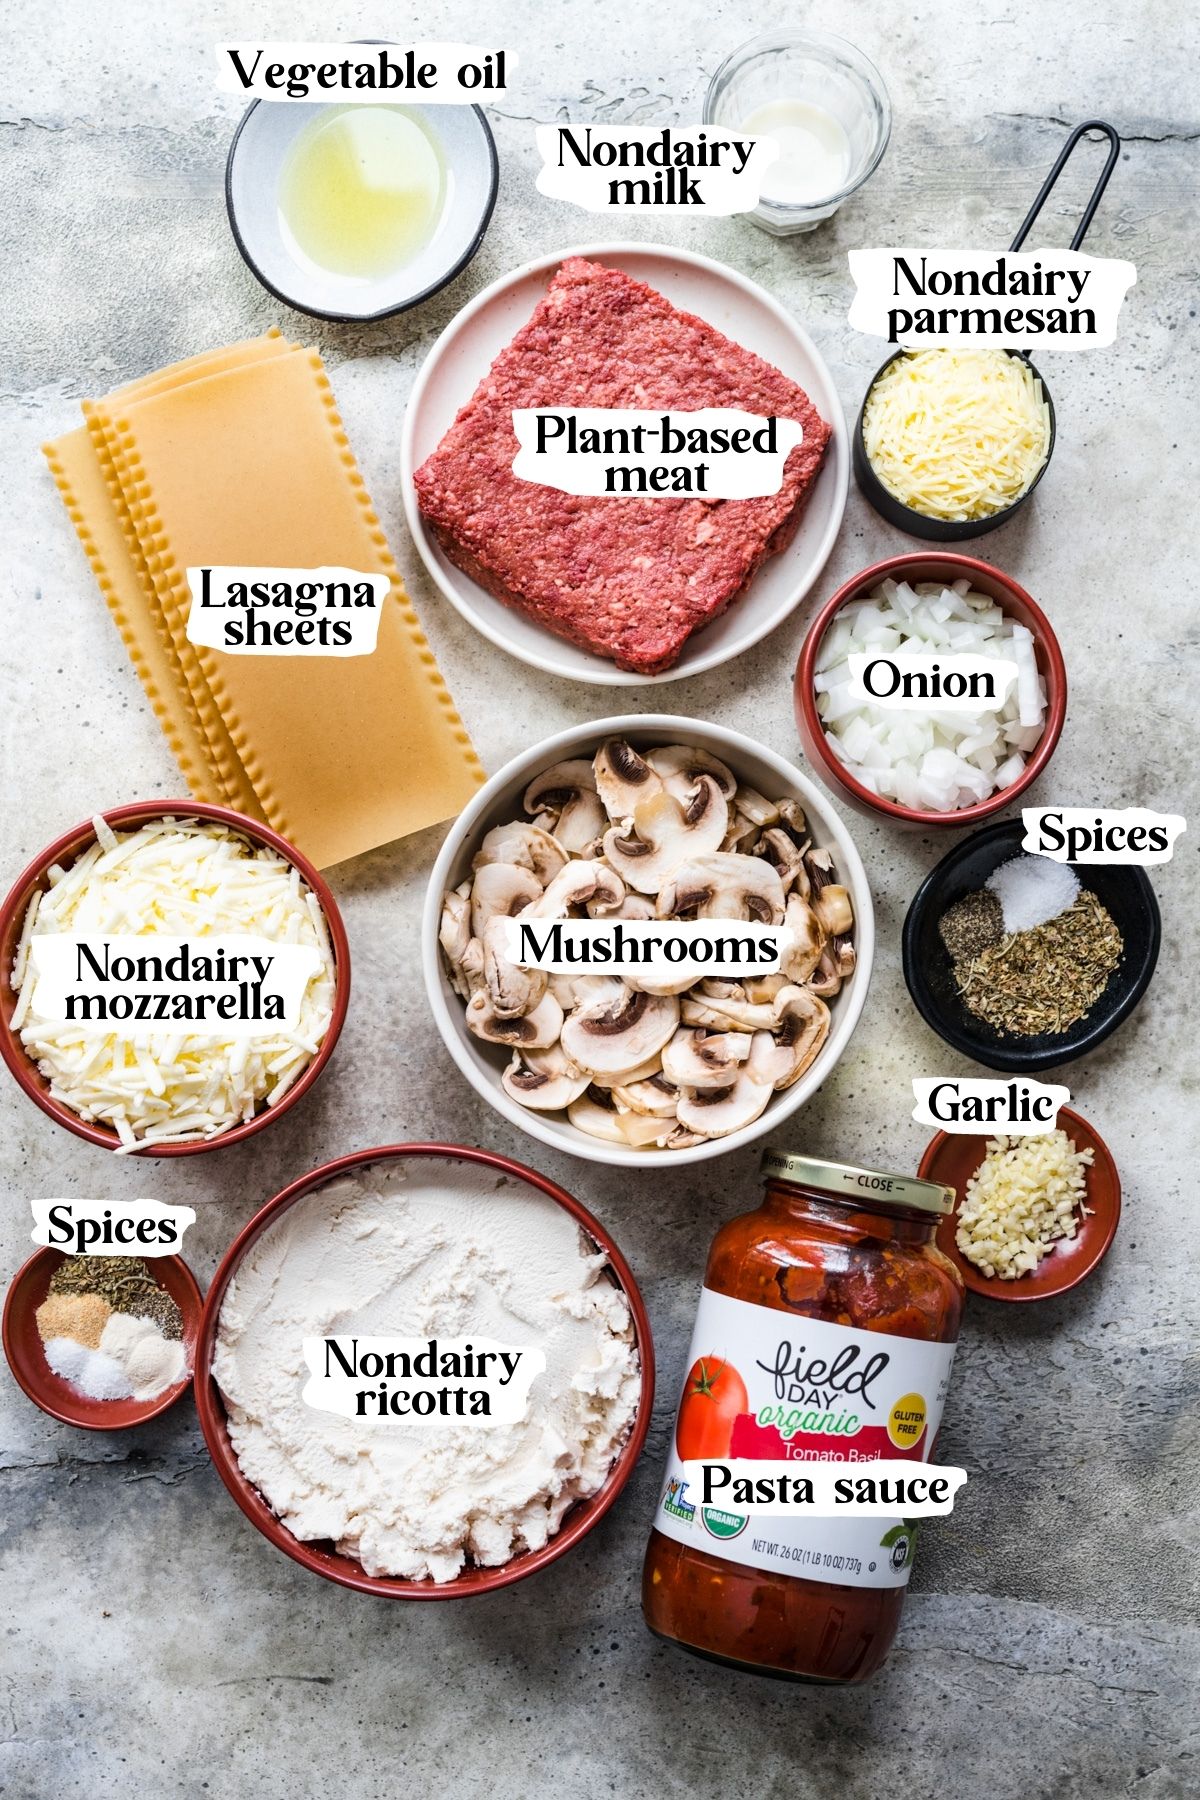 Overhead view of vegan lasagna ingredients, including plant-based meat and cheeses.